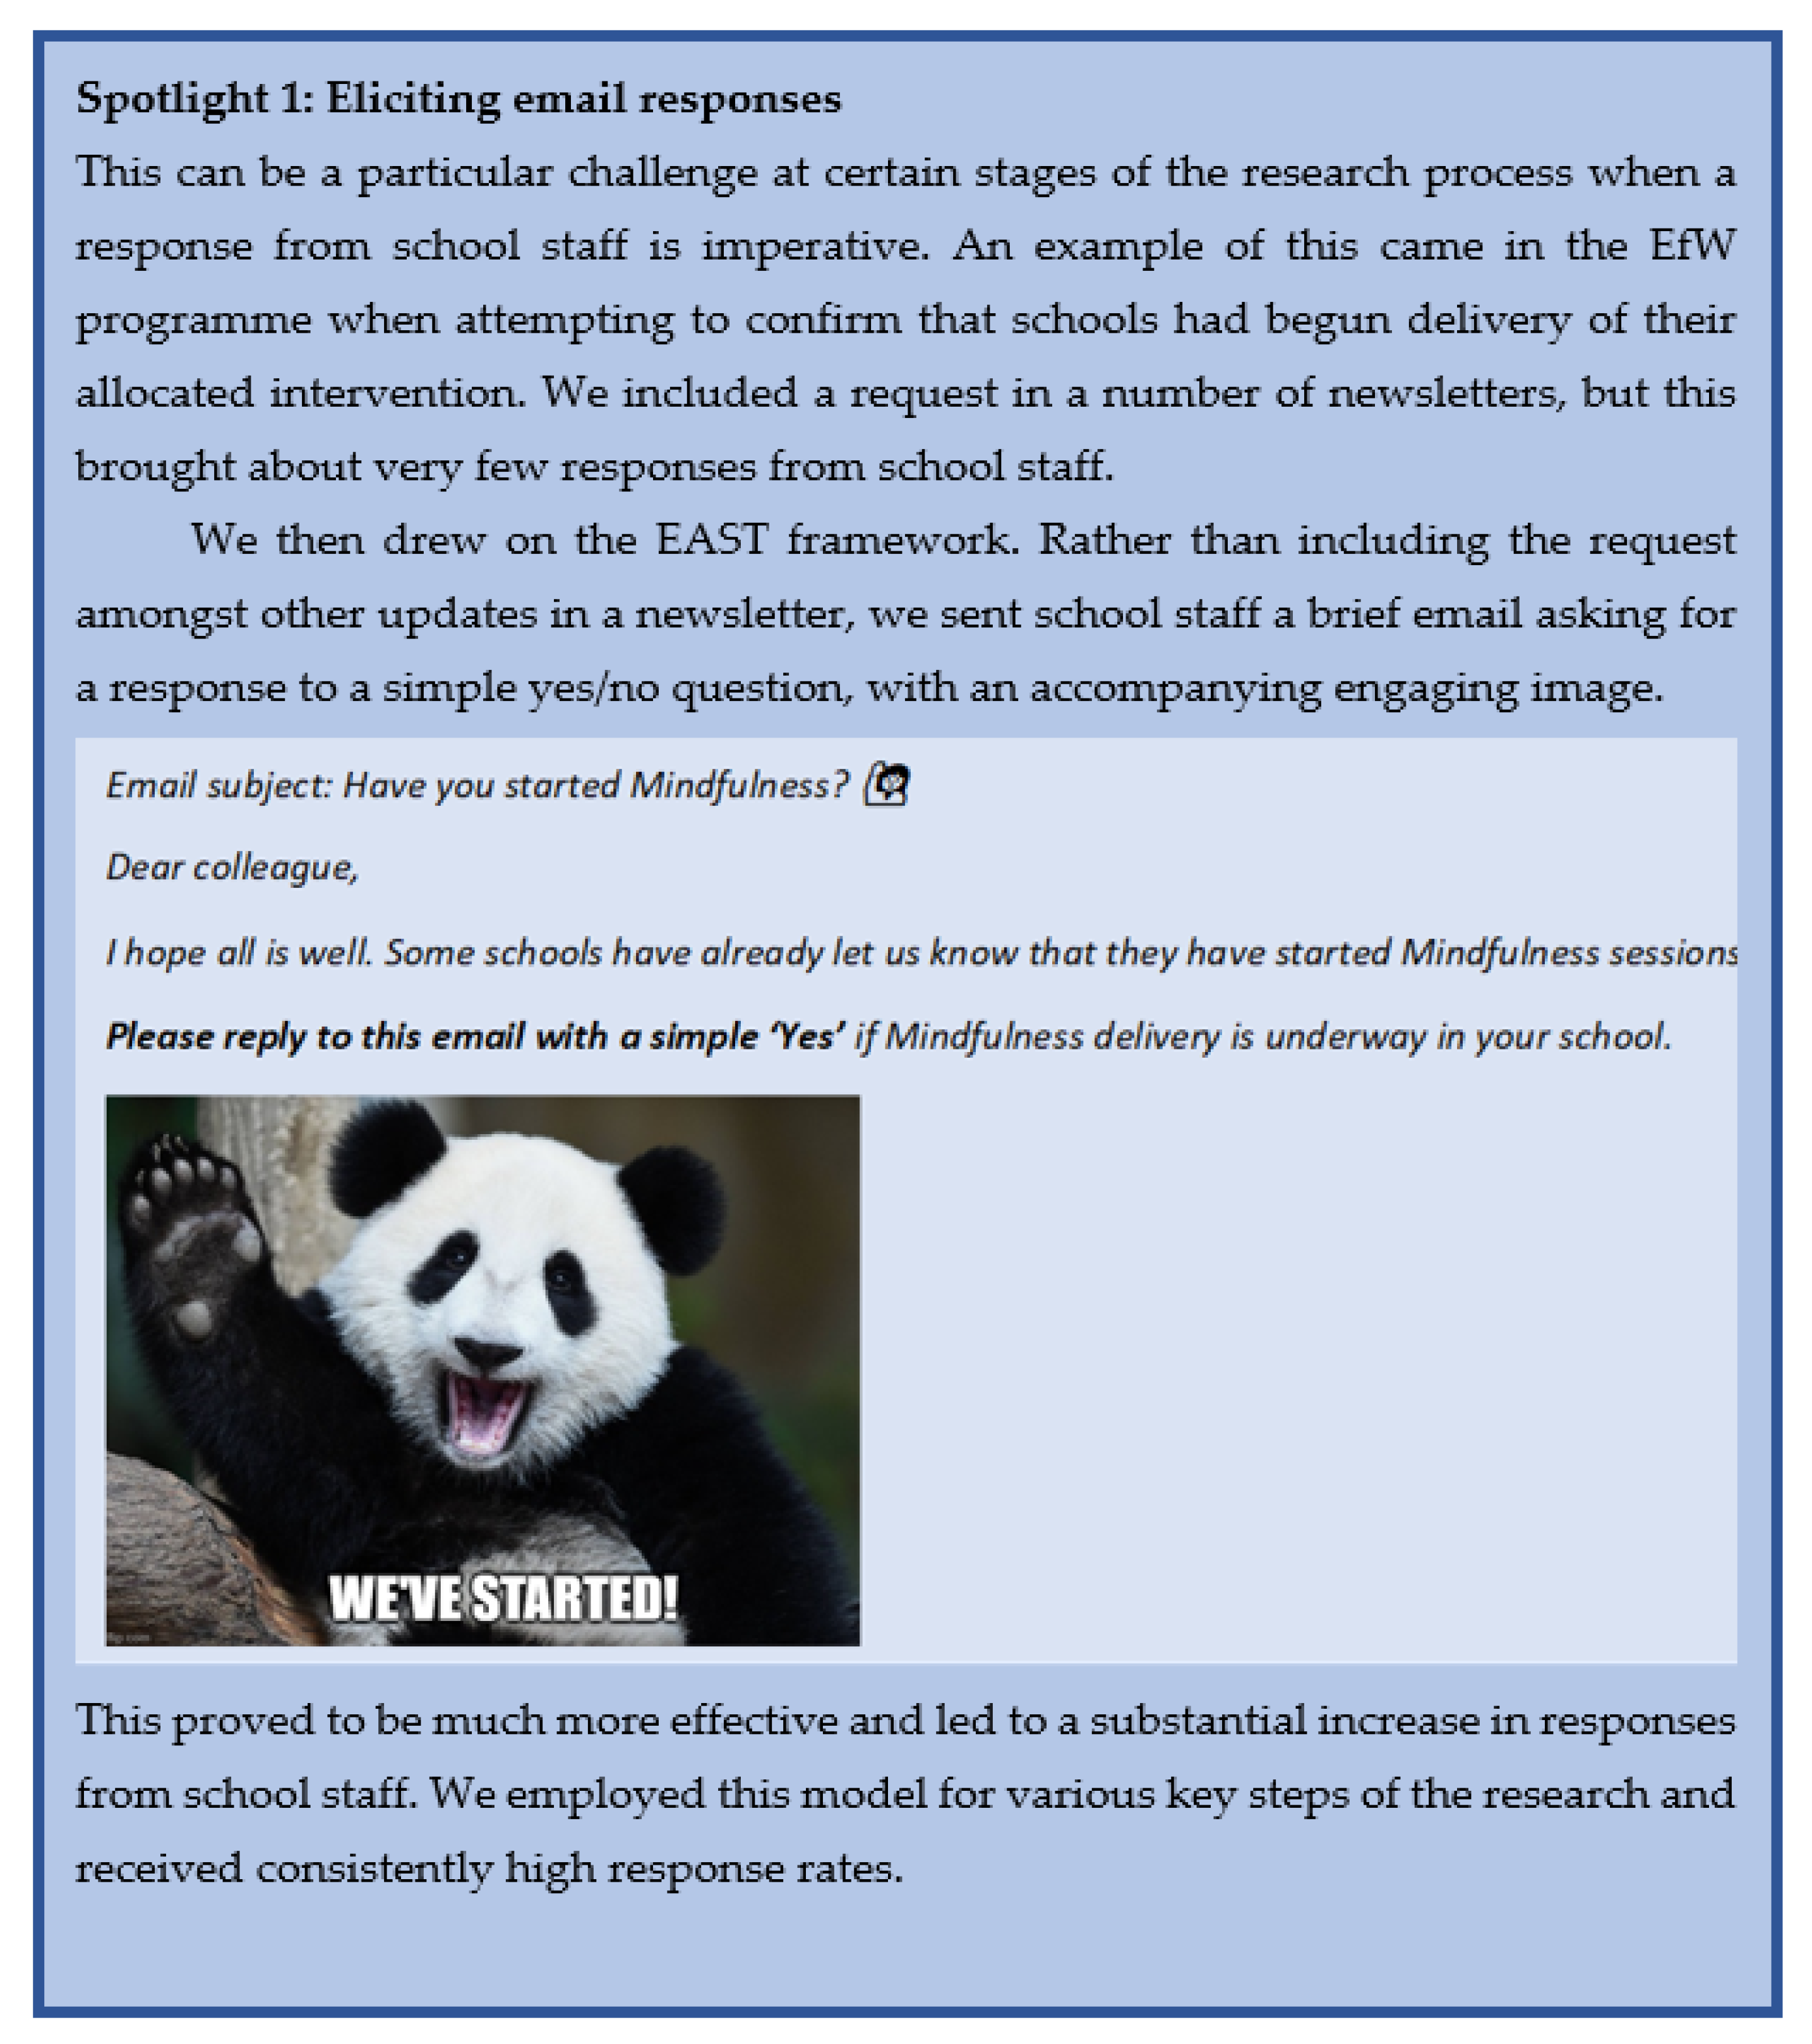 IJERPH | Free Full-Text | &lsquo;Shall We Send a Panda?&rsquo; A Practical  Guide to Engaging Schools in Research: Learning from Large-Scale Mental  Health Intervention Trials